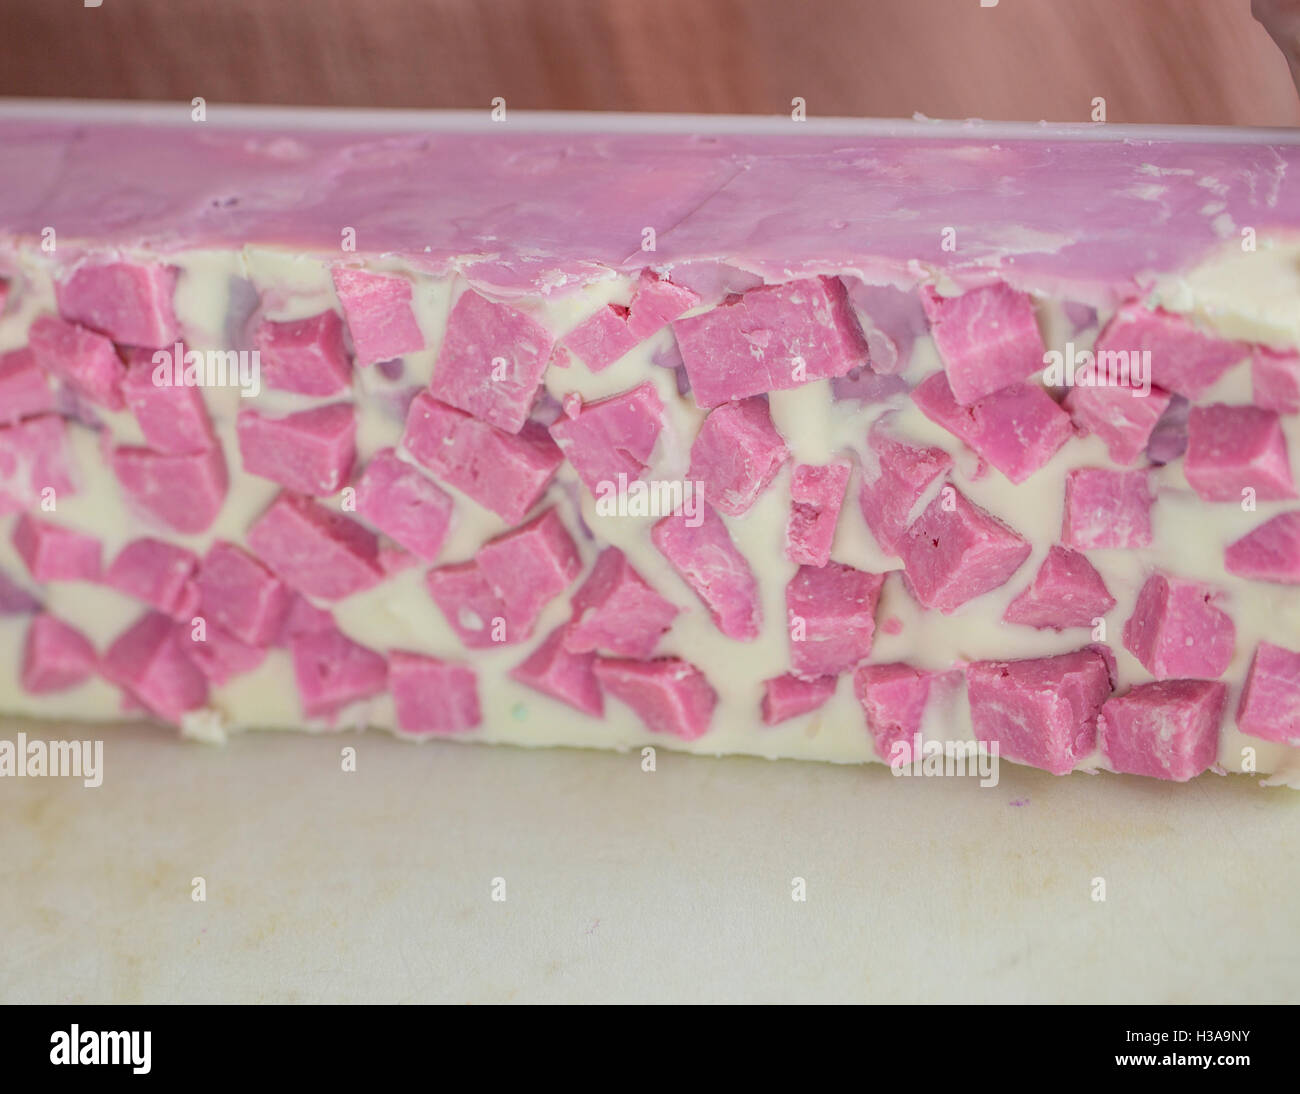 A Large Bar Of Soap Just Pulled From The Mold Stock Photo